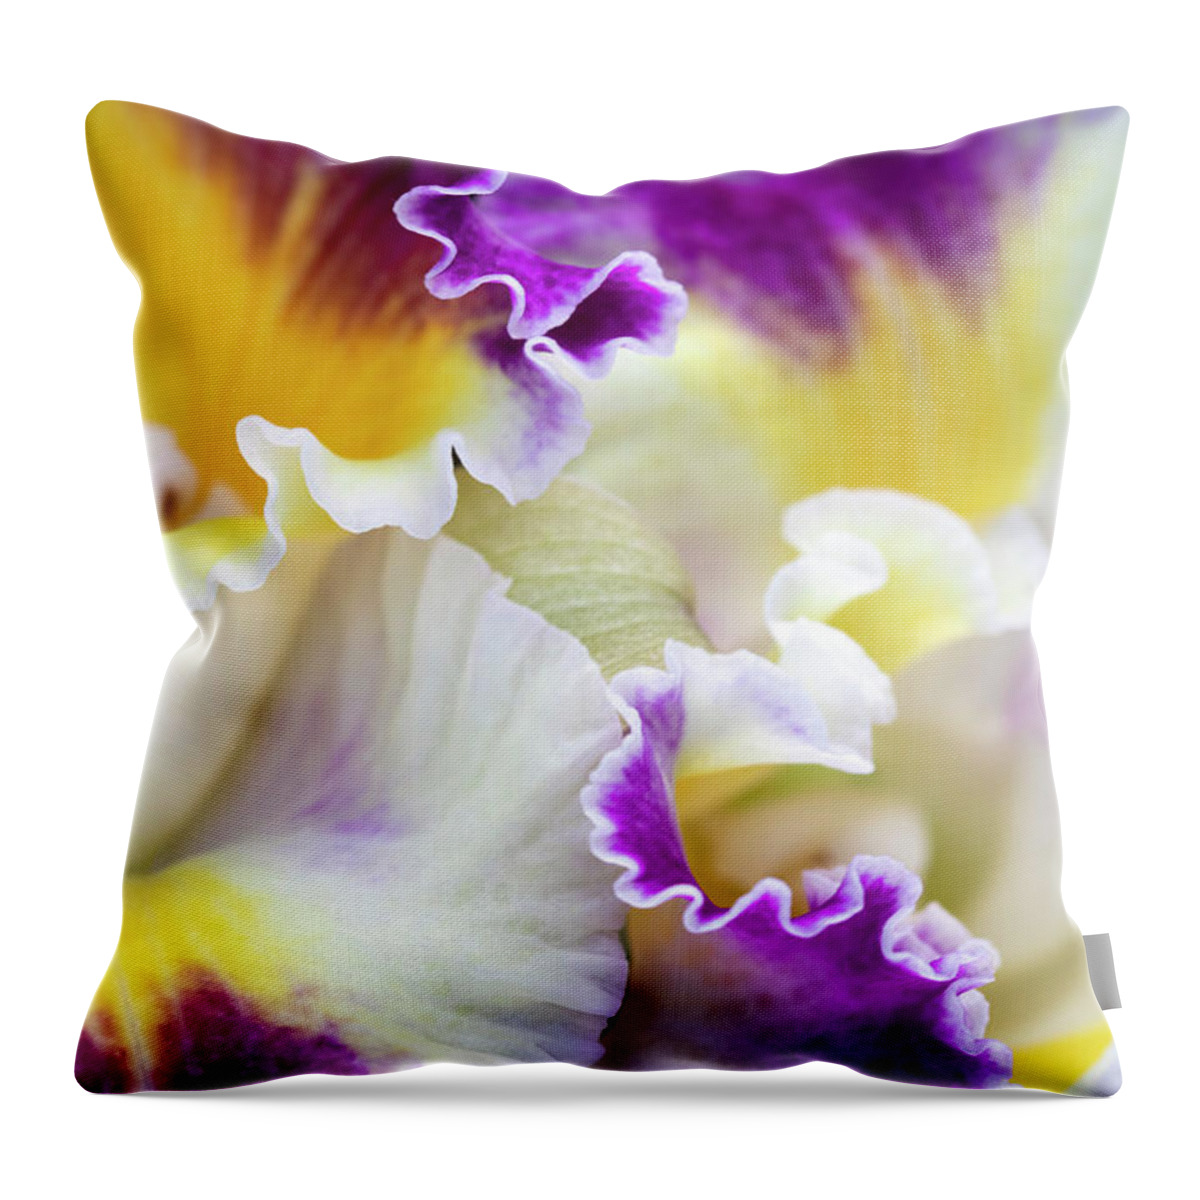 Flower Throw Pillow featuring the photograph Harlequin Cattleya Orchid by Patty Colabuono